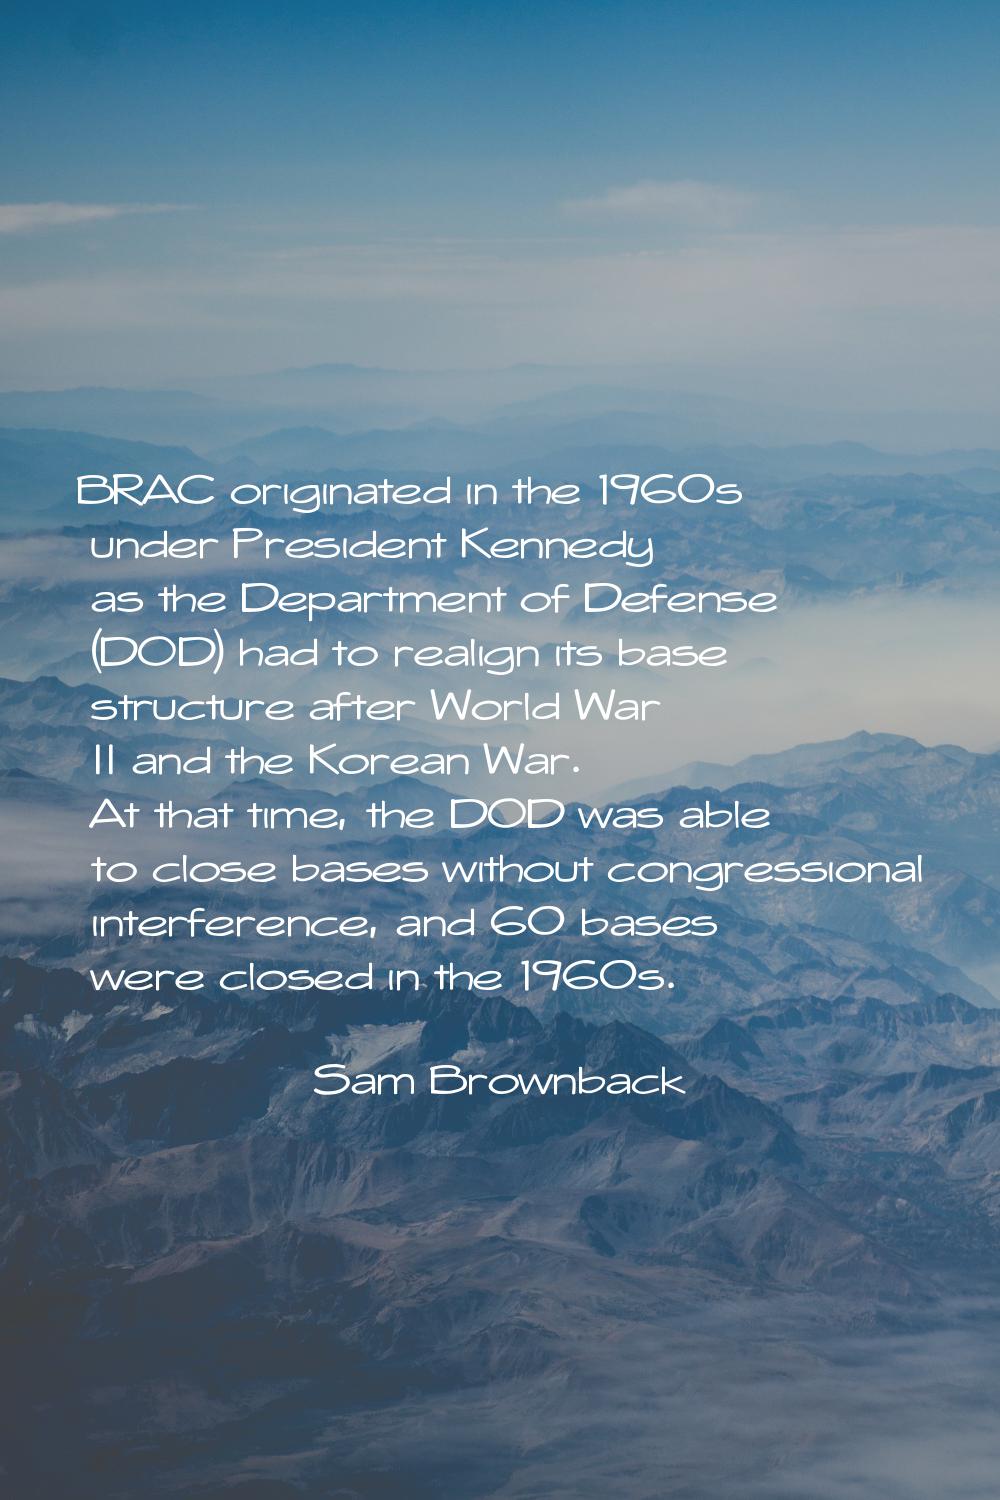 BRAC originated in the 1960s under President Kennedy as the Department of Defense (DOD) had to real